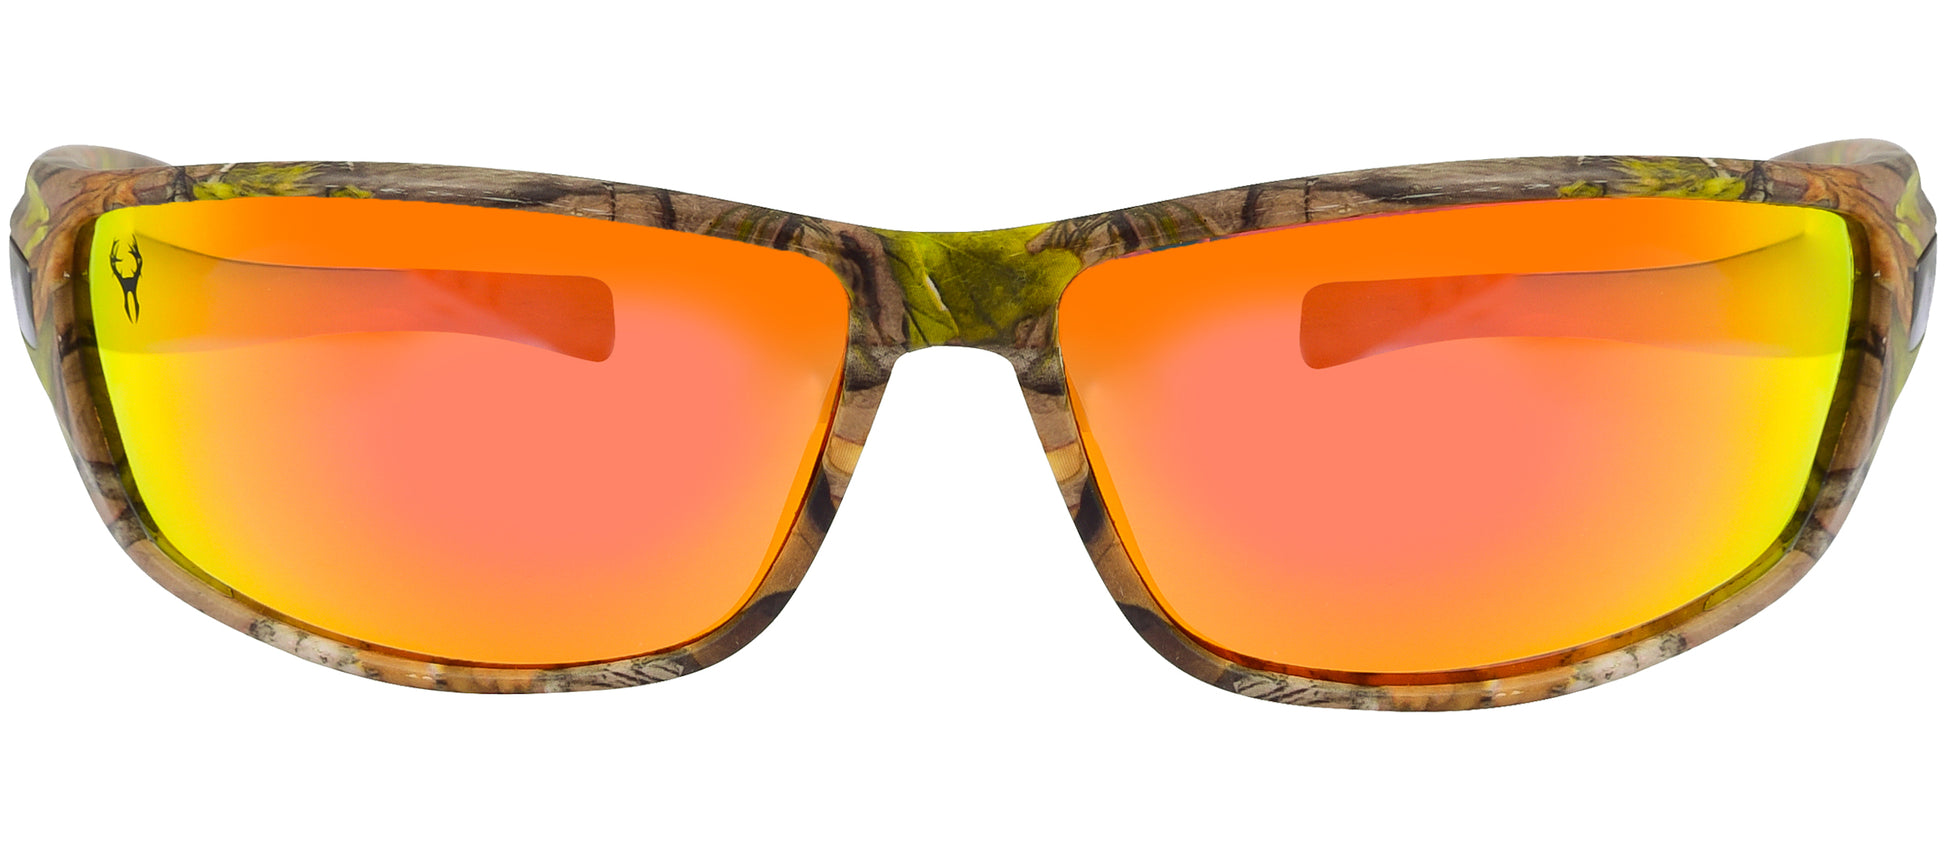 Brown Forest Camouflage Polarized Sunglasses for Men - WhiteTail - Free  Matching Microfiber Pouch